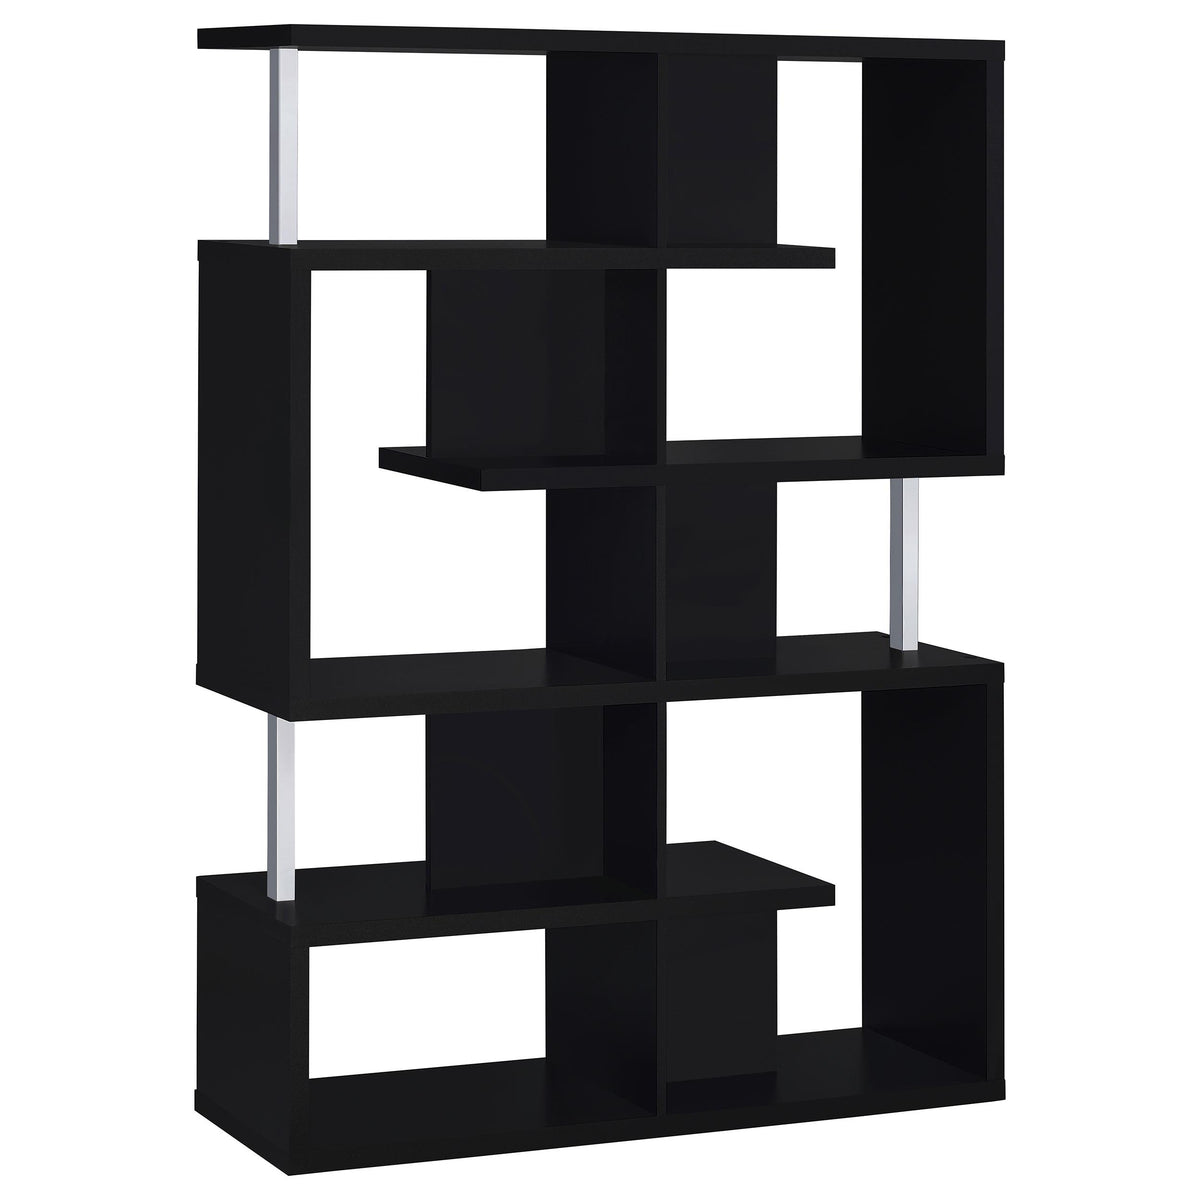 Hoover 5-tier Bookcase Black and Chrome  Las Vegas Furniture Stores